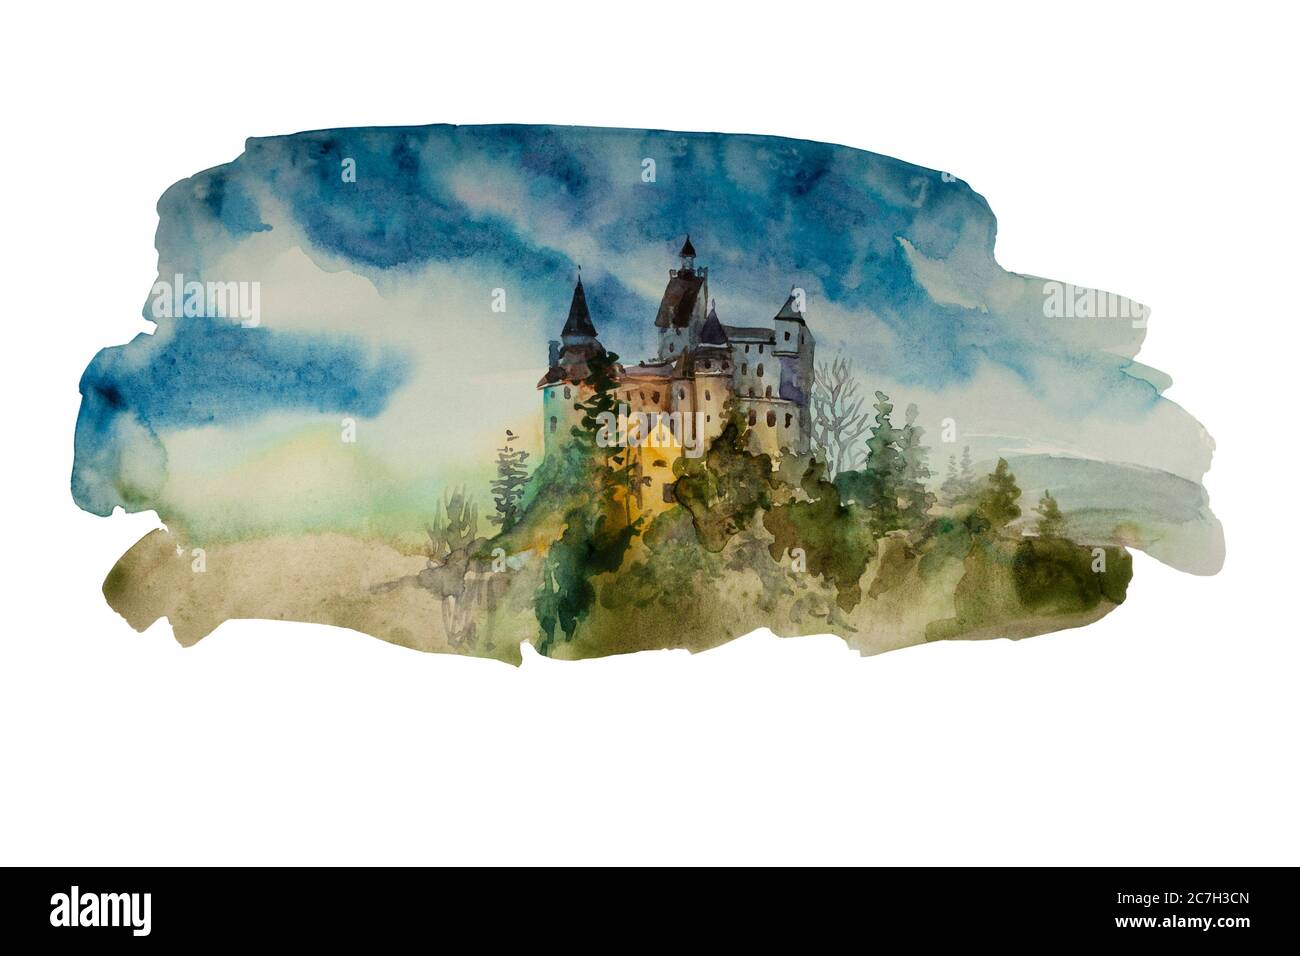 Watercolor backdrop with castle on the hill. Original illustration of medieval european castle isolated on white background Stock Photo